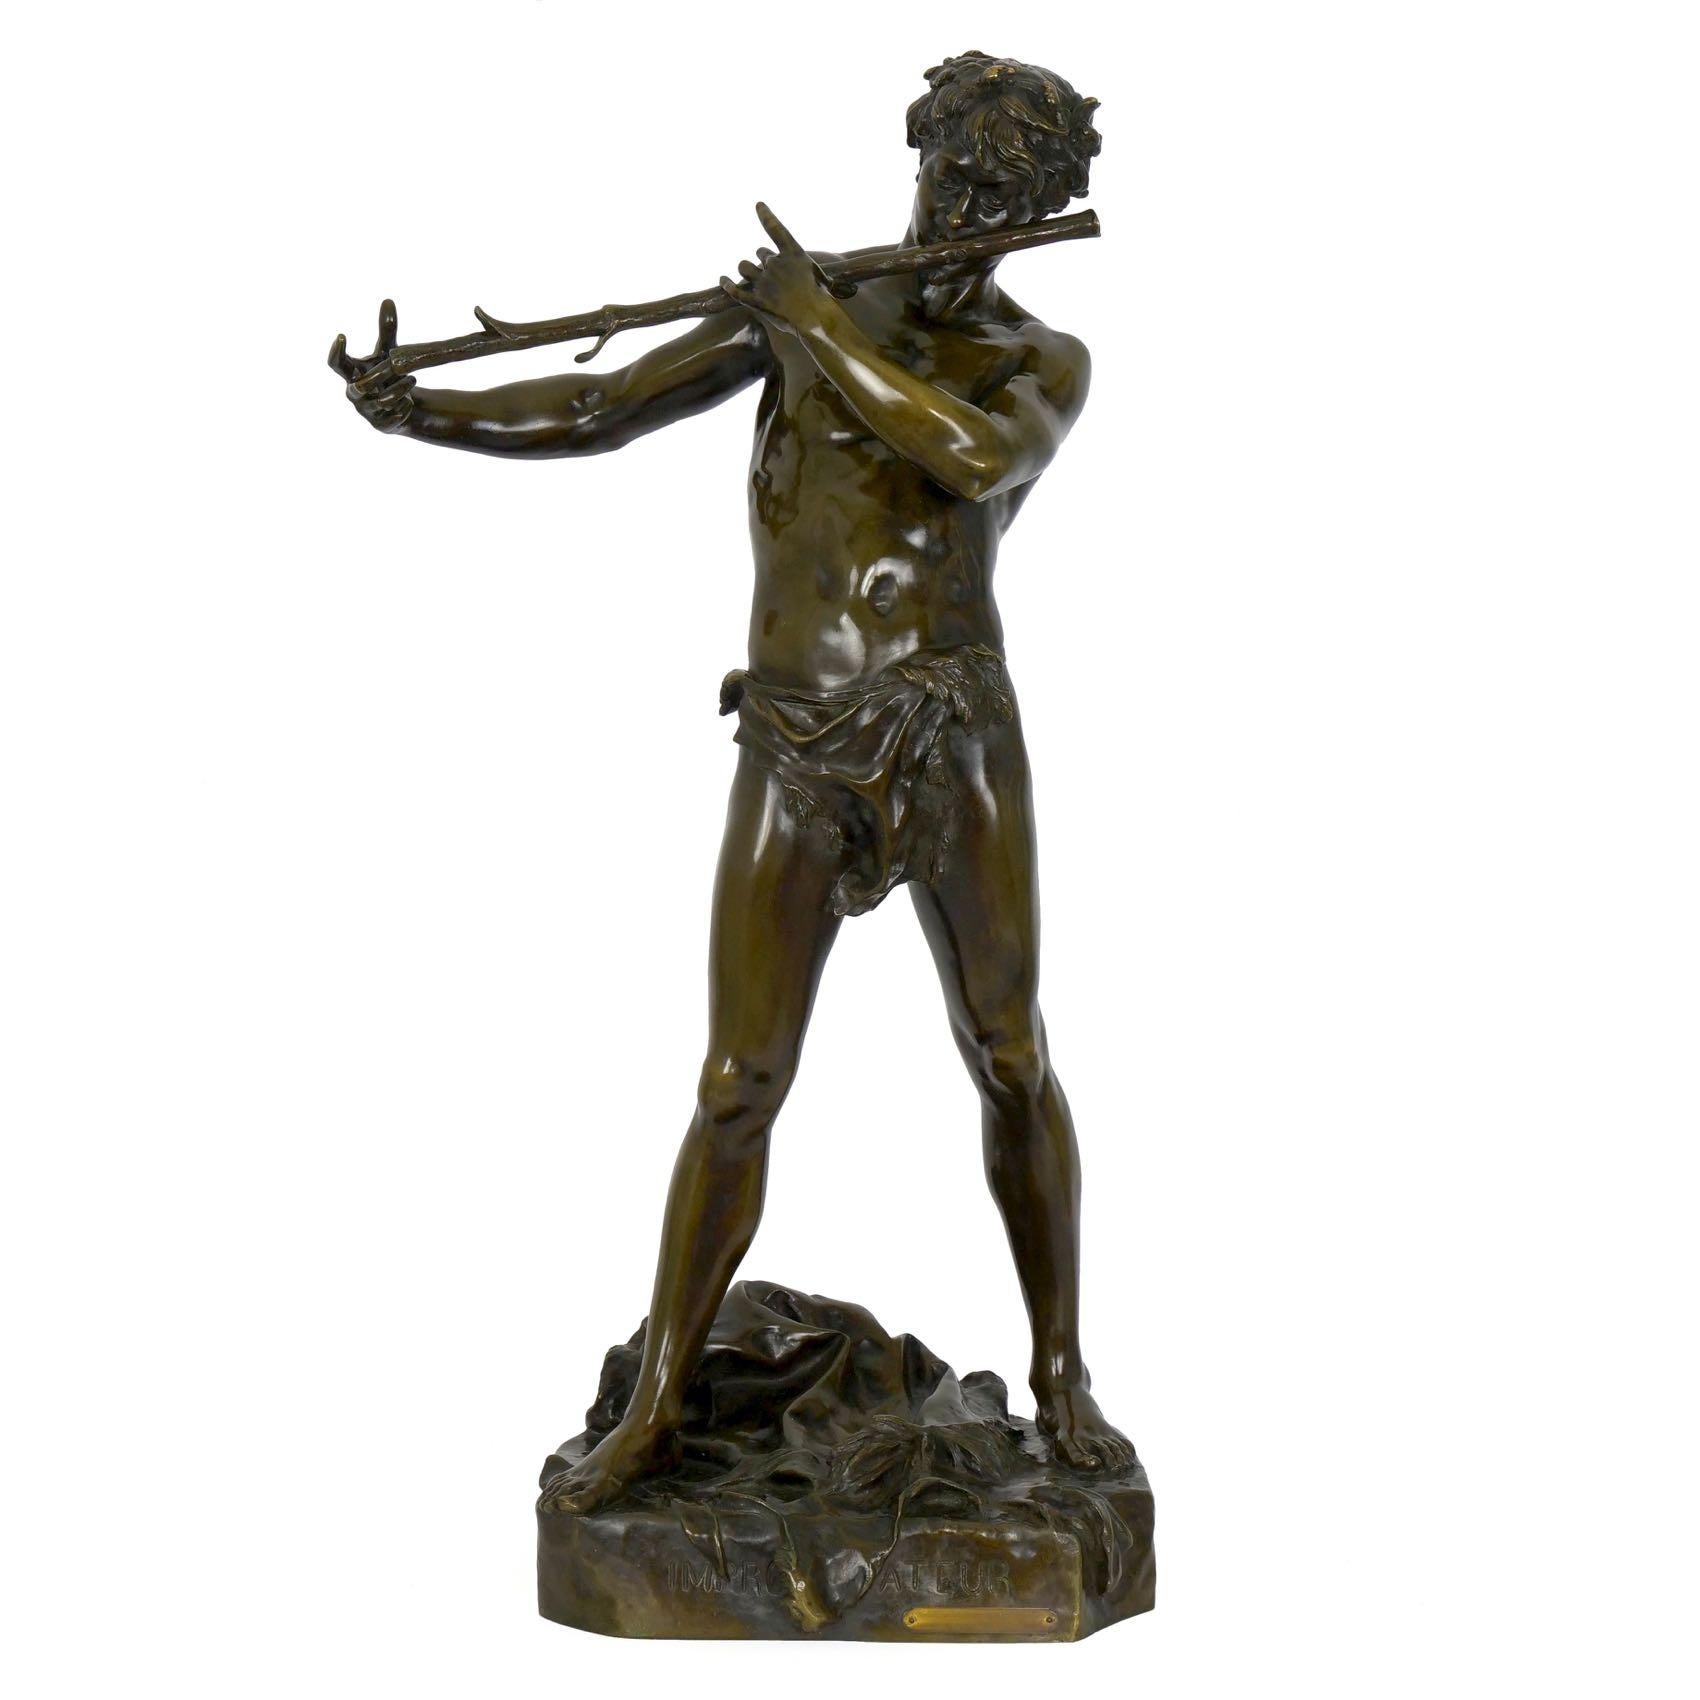 An exceptional antique bronze sculpture capturing the mythological Pan with his flute, the work is an expression of the naturalism that overtook the arts in the late 19th century. Originally exhibited in plaster at Salon in 1887, L'Improvisateur was